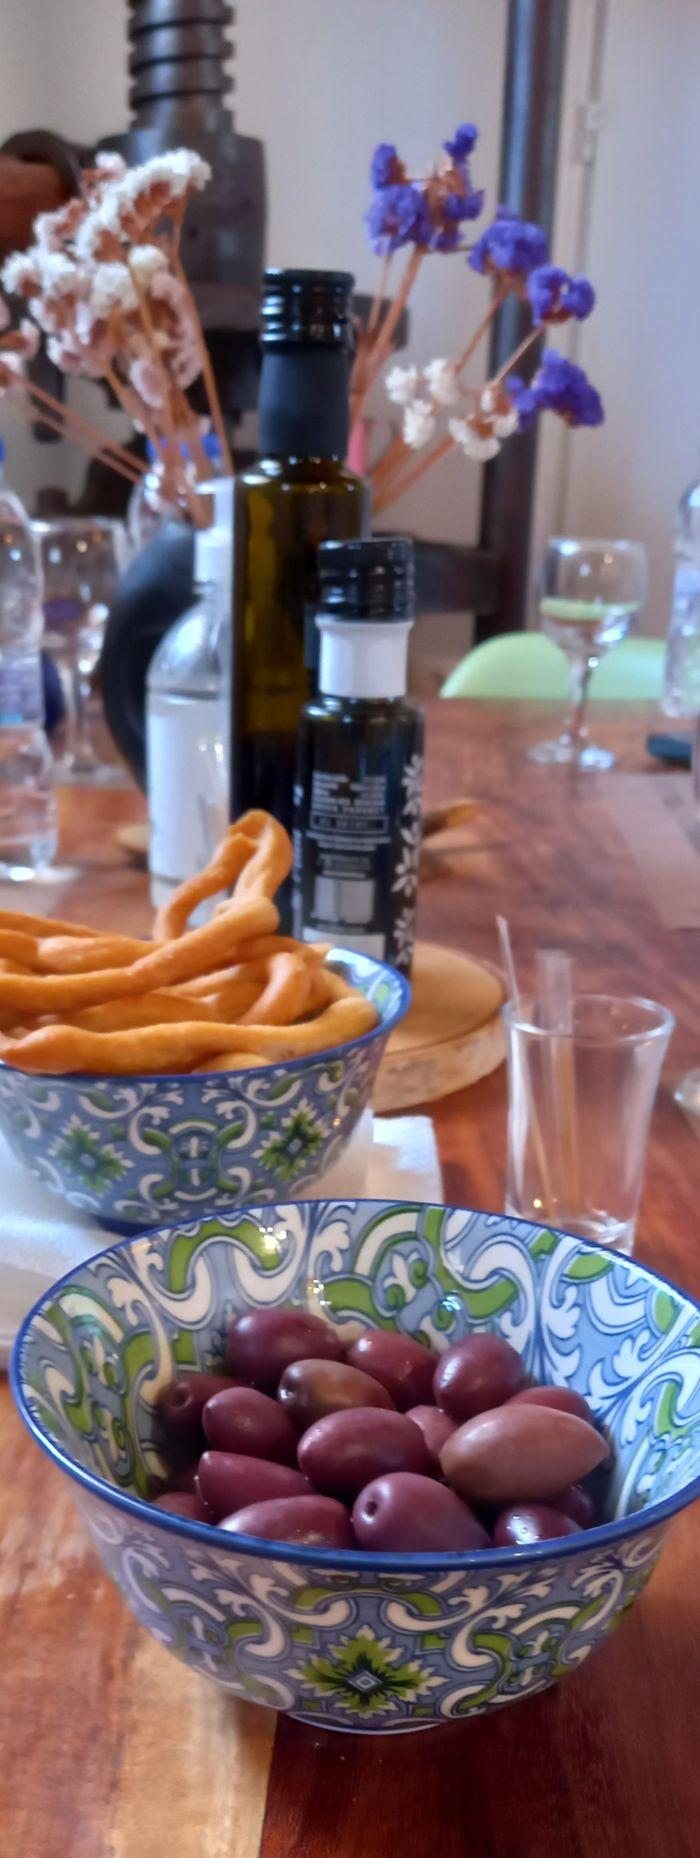 Olive Oil tasting and more...